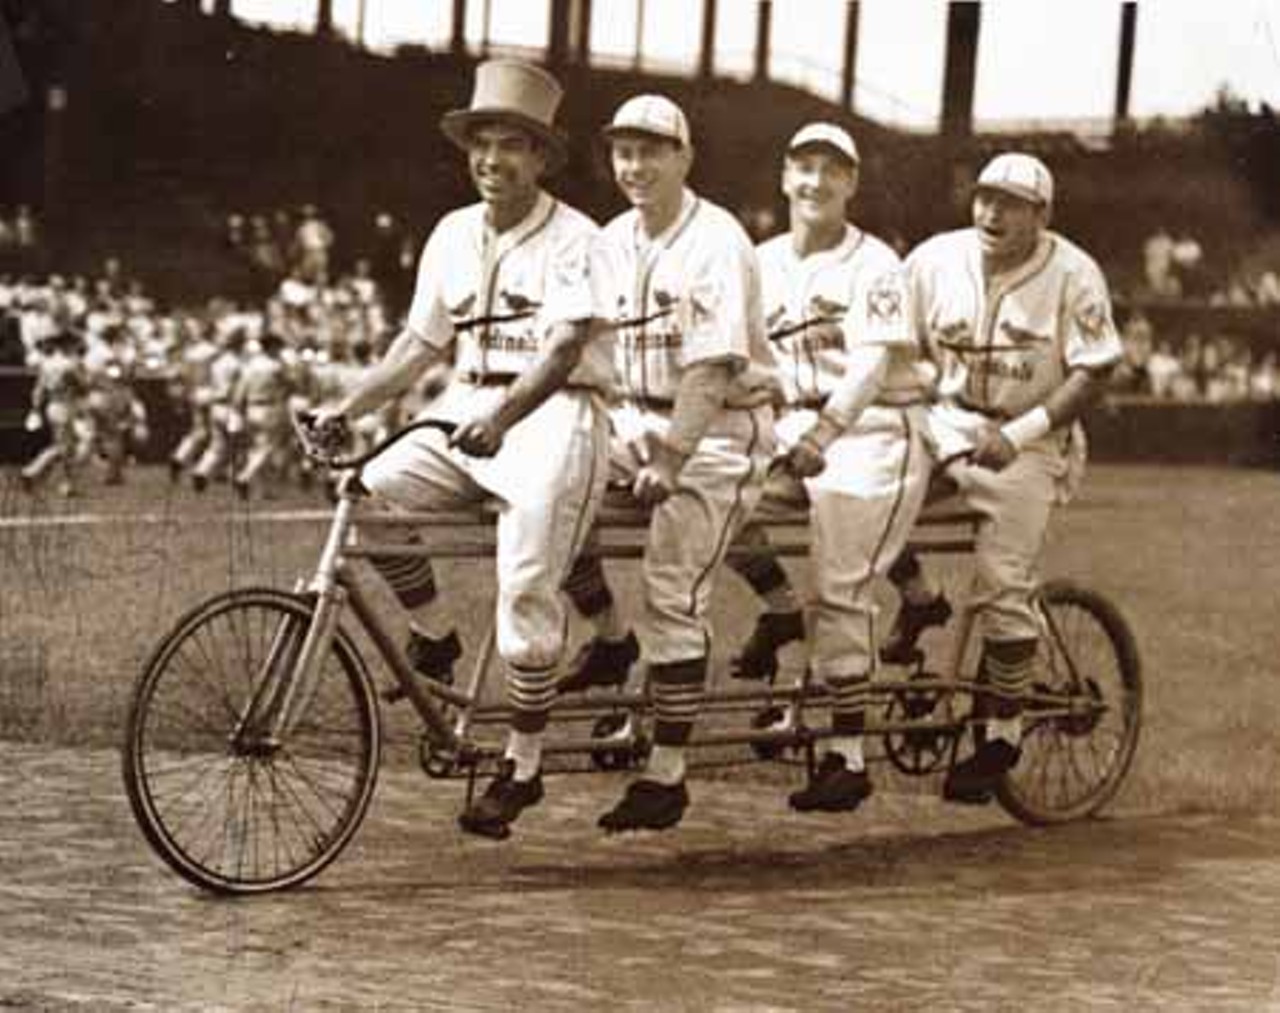 St. Louis Cardinals players on a four-seater bicycle.